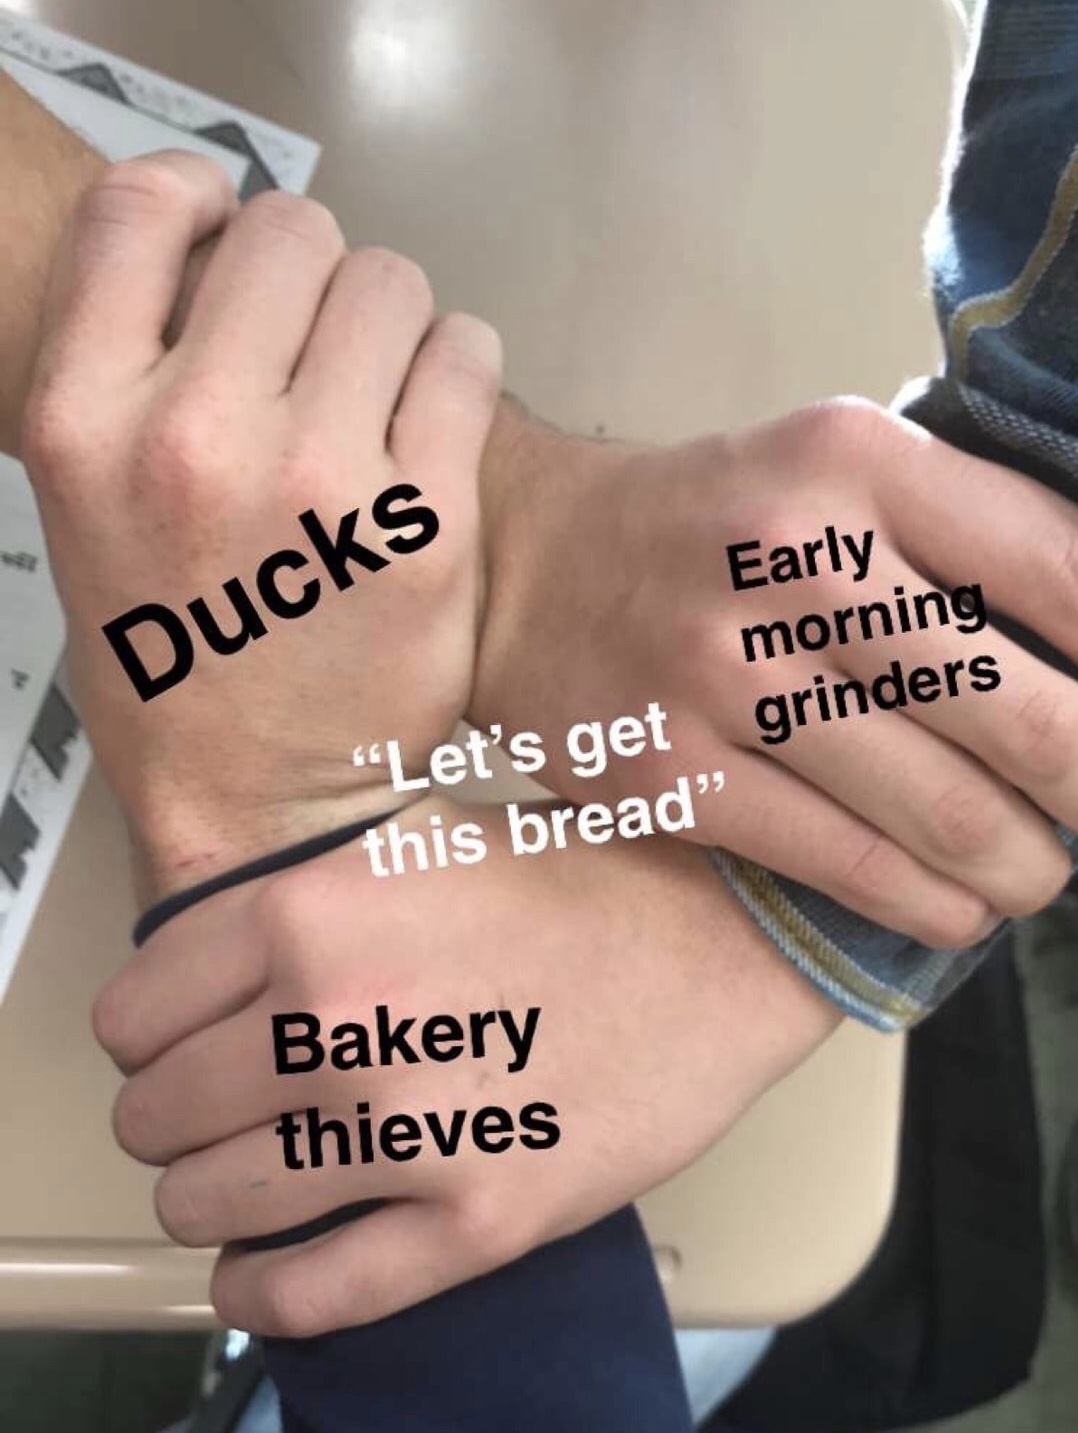 Ducks Early morning grinders "Let's get this bread" Bakery thieves